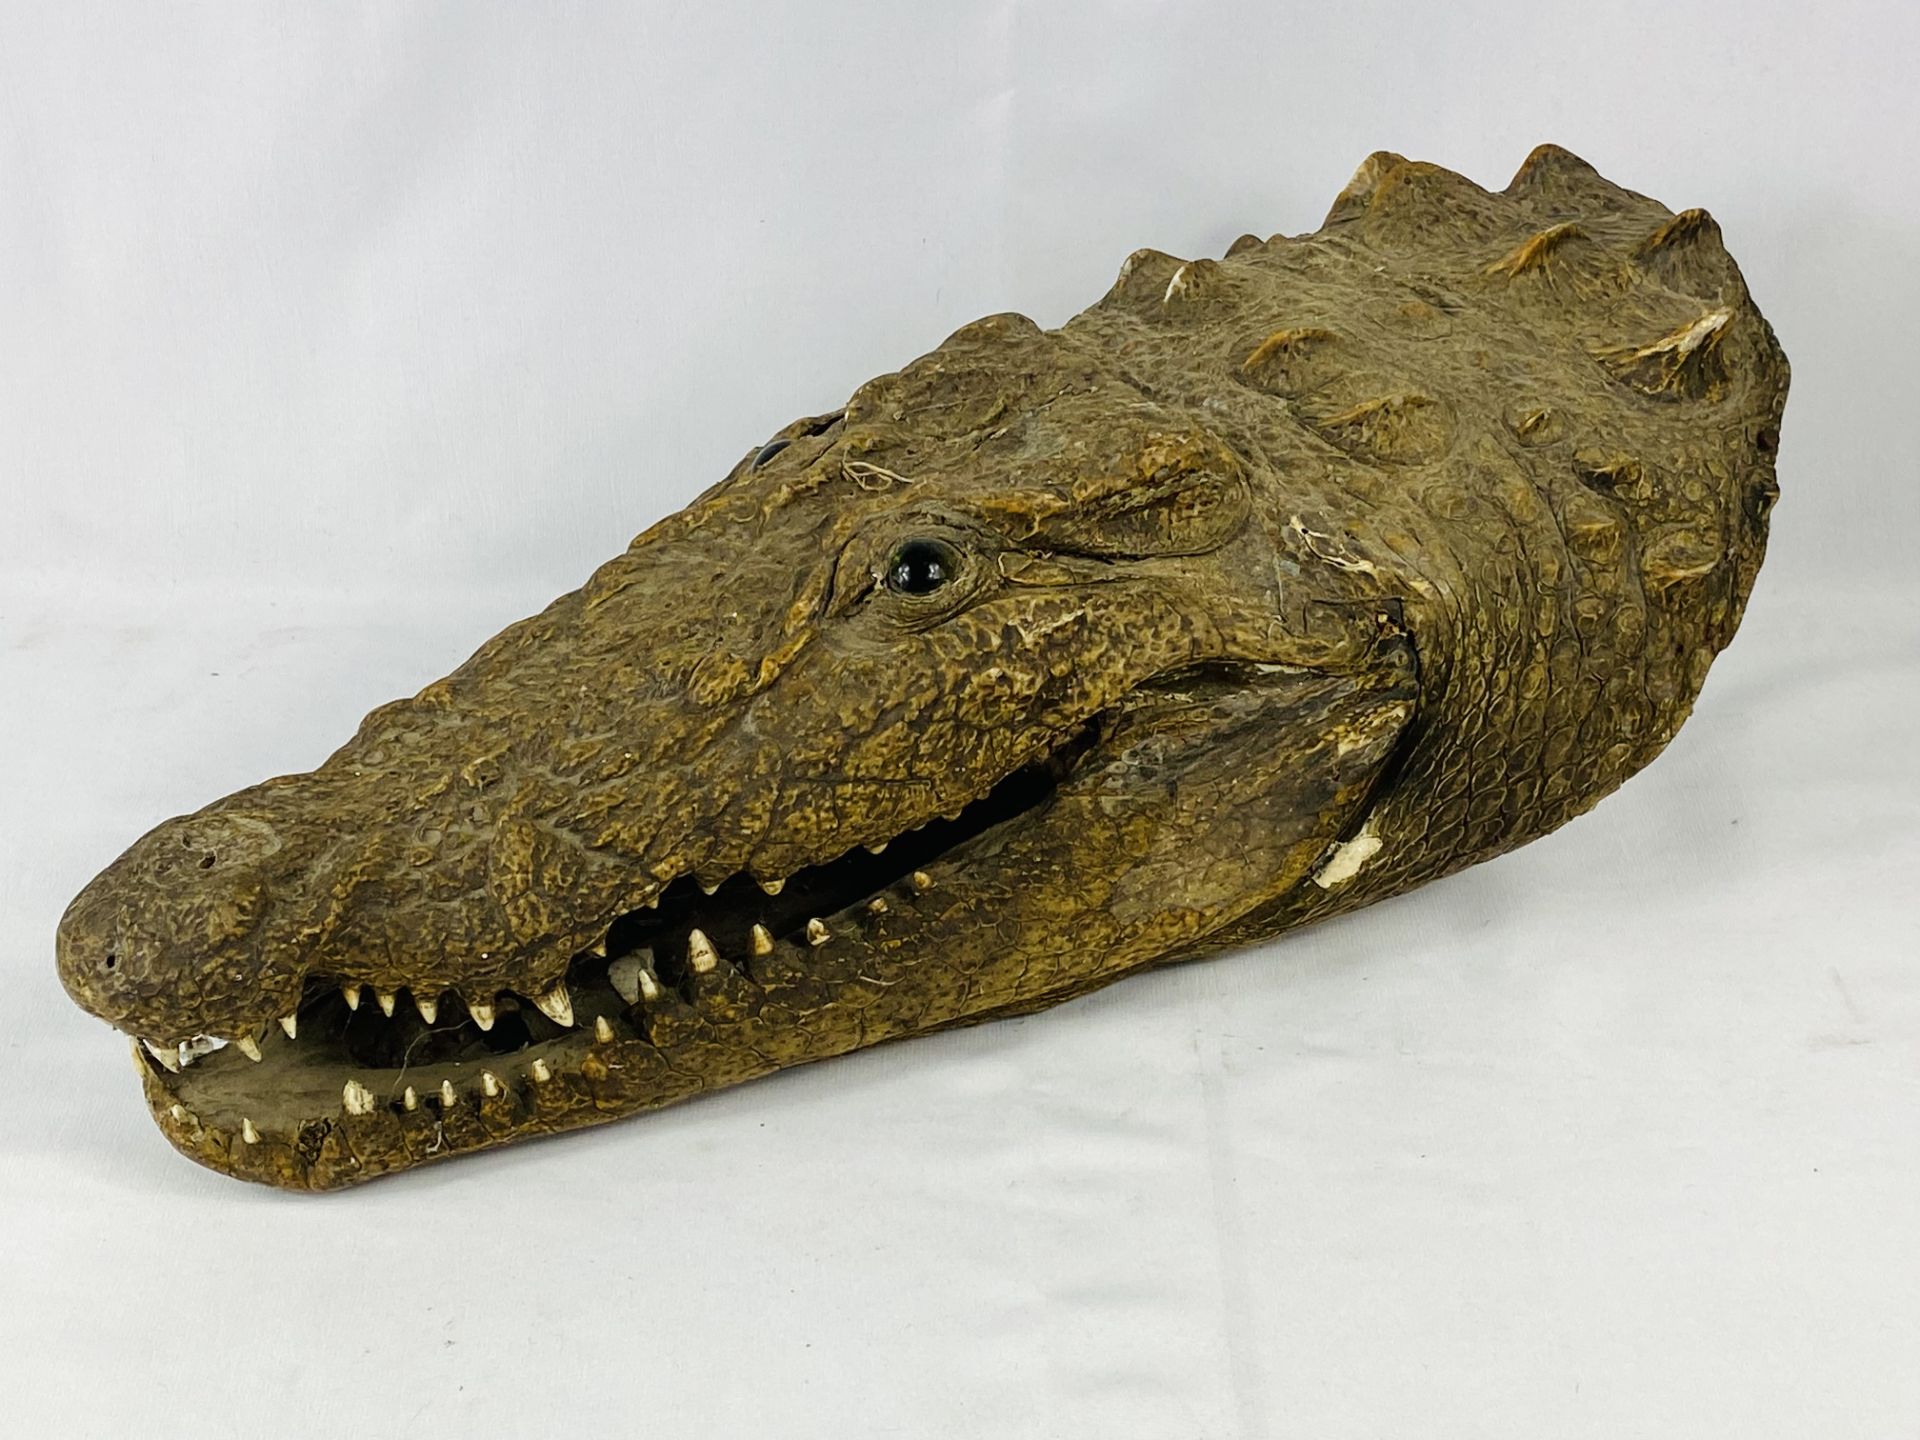 Wall mounted taxidermy crocodile head. CITIES REGULATIONS APPLY TO THIS LOT